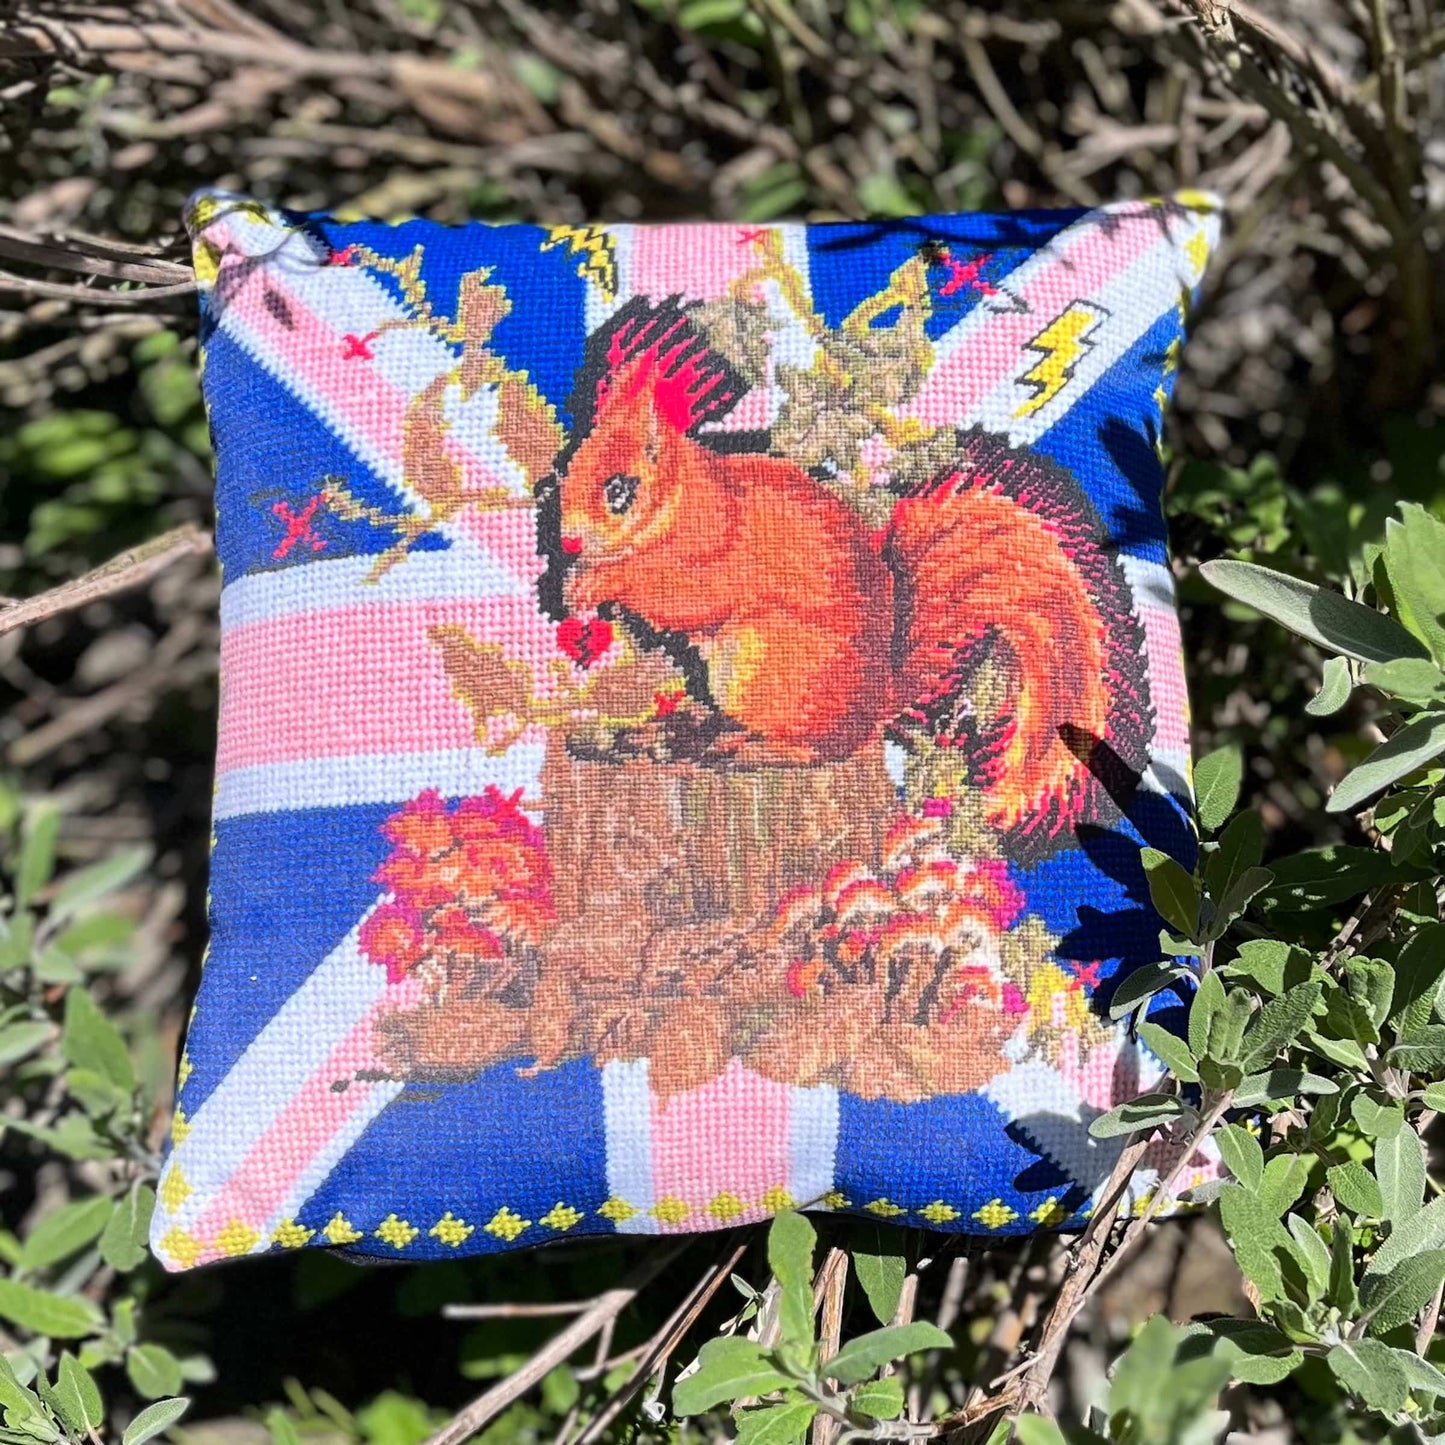 red squirrel with hot pink mohawk sits on a log, surrounded by British flag, shocking purple mushrooms, lightening bolts